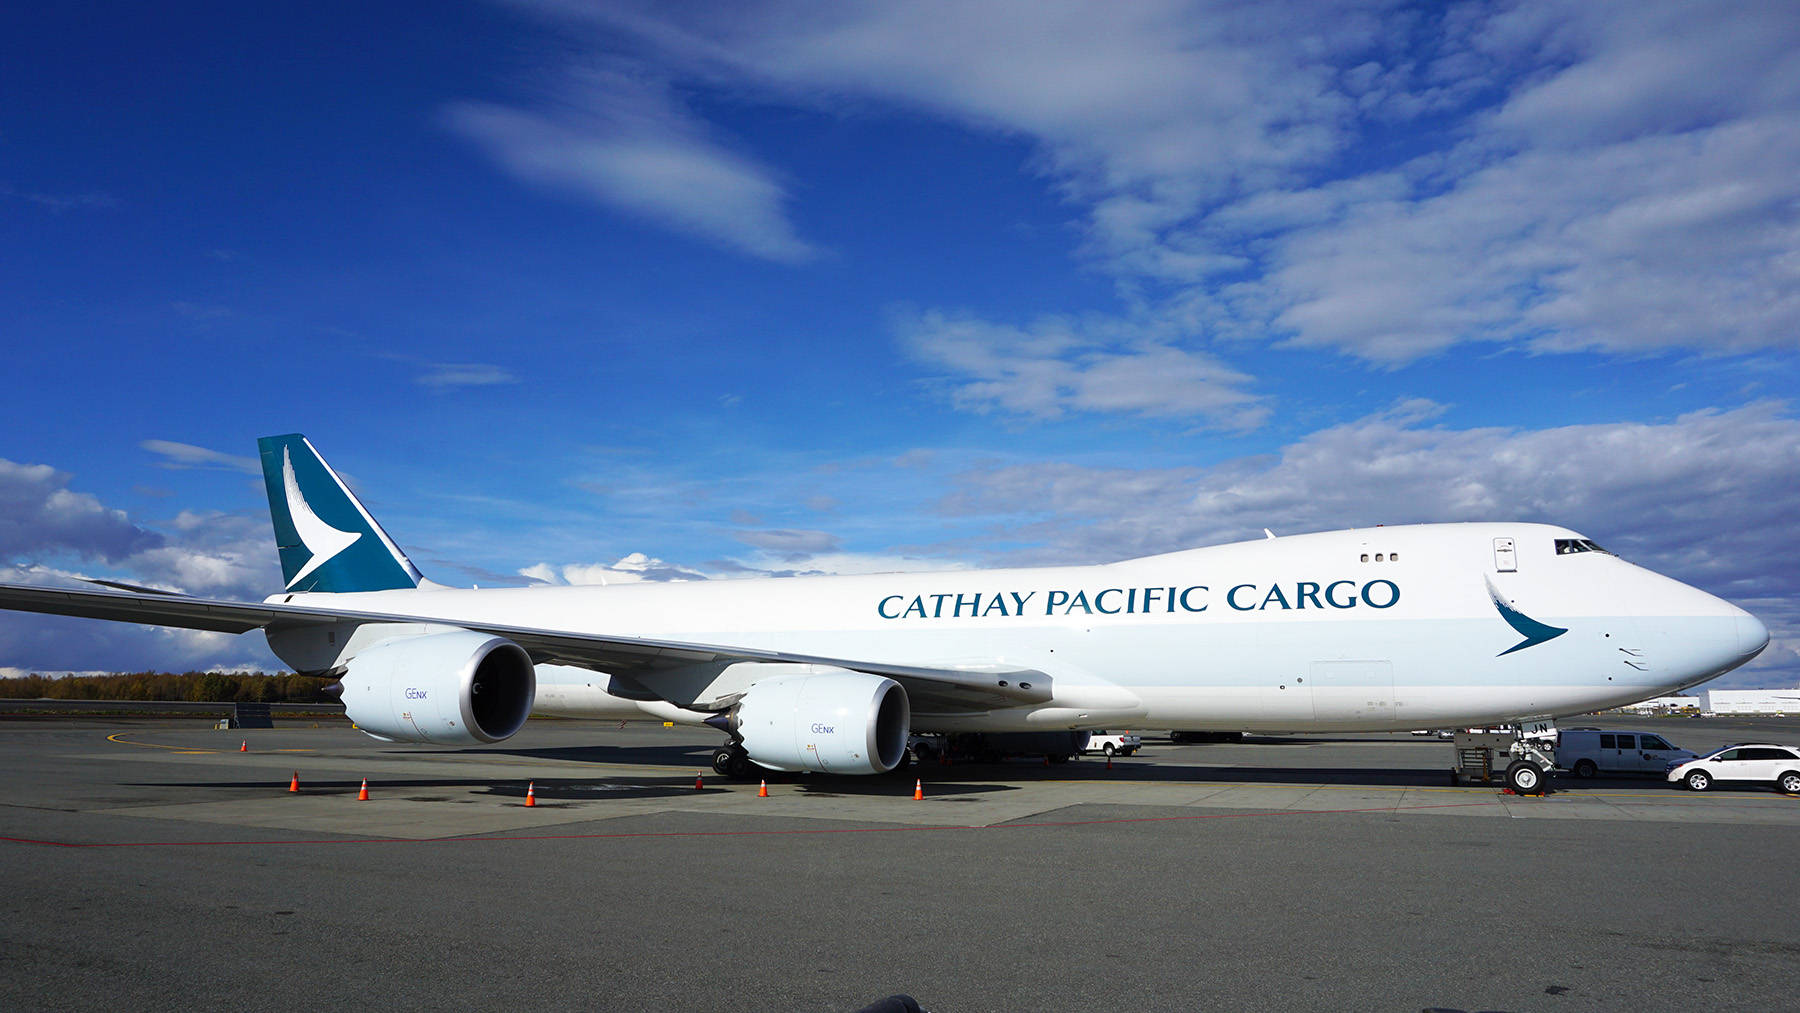 Cathay Pacific White Cargo Wallpaper